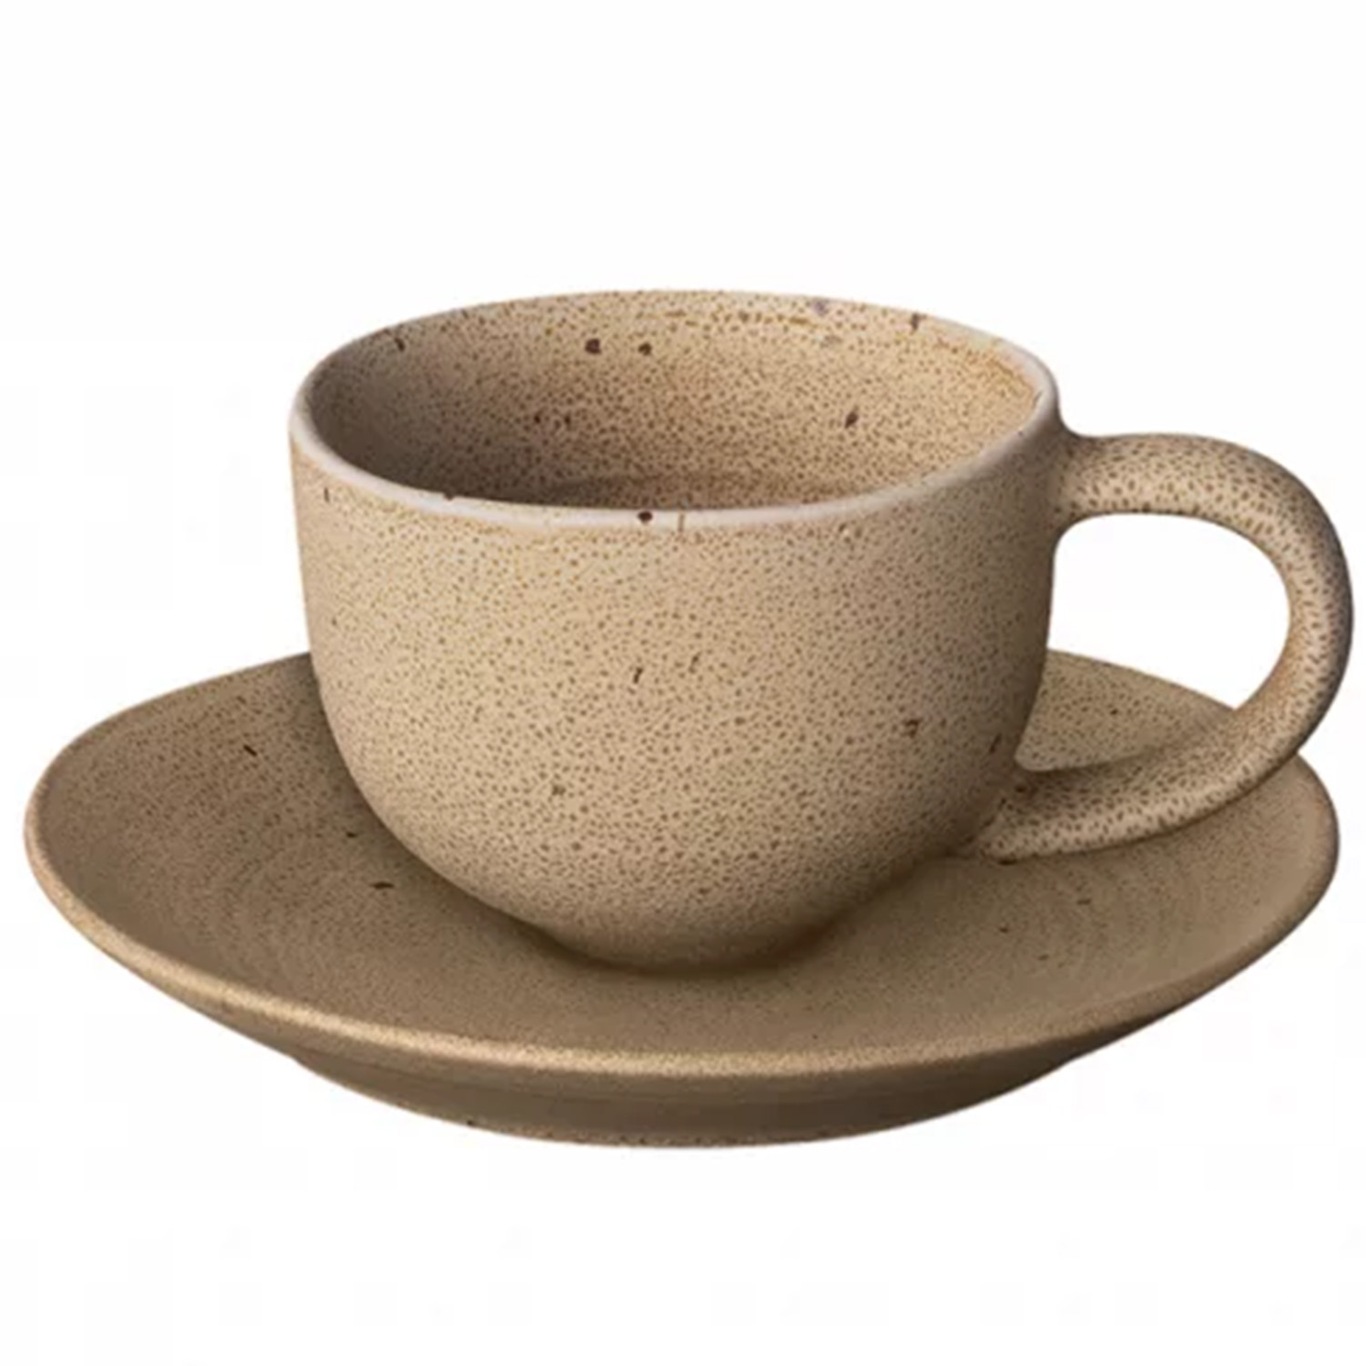 KUMI Espresso Cup With Saucer 2-pack, Fungi